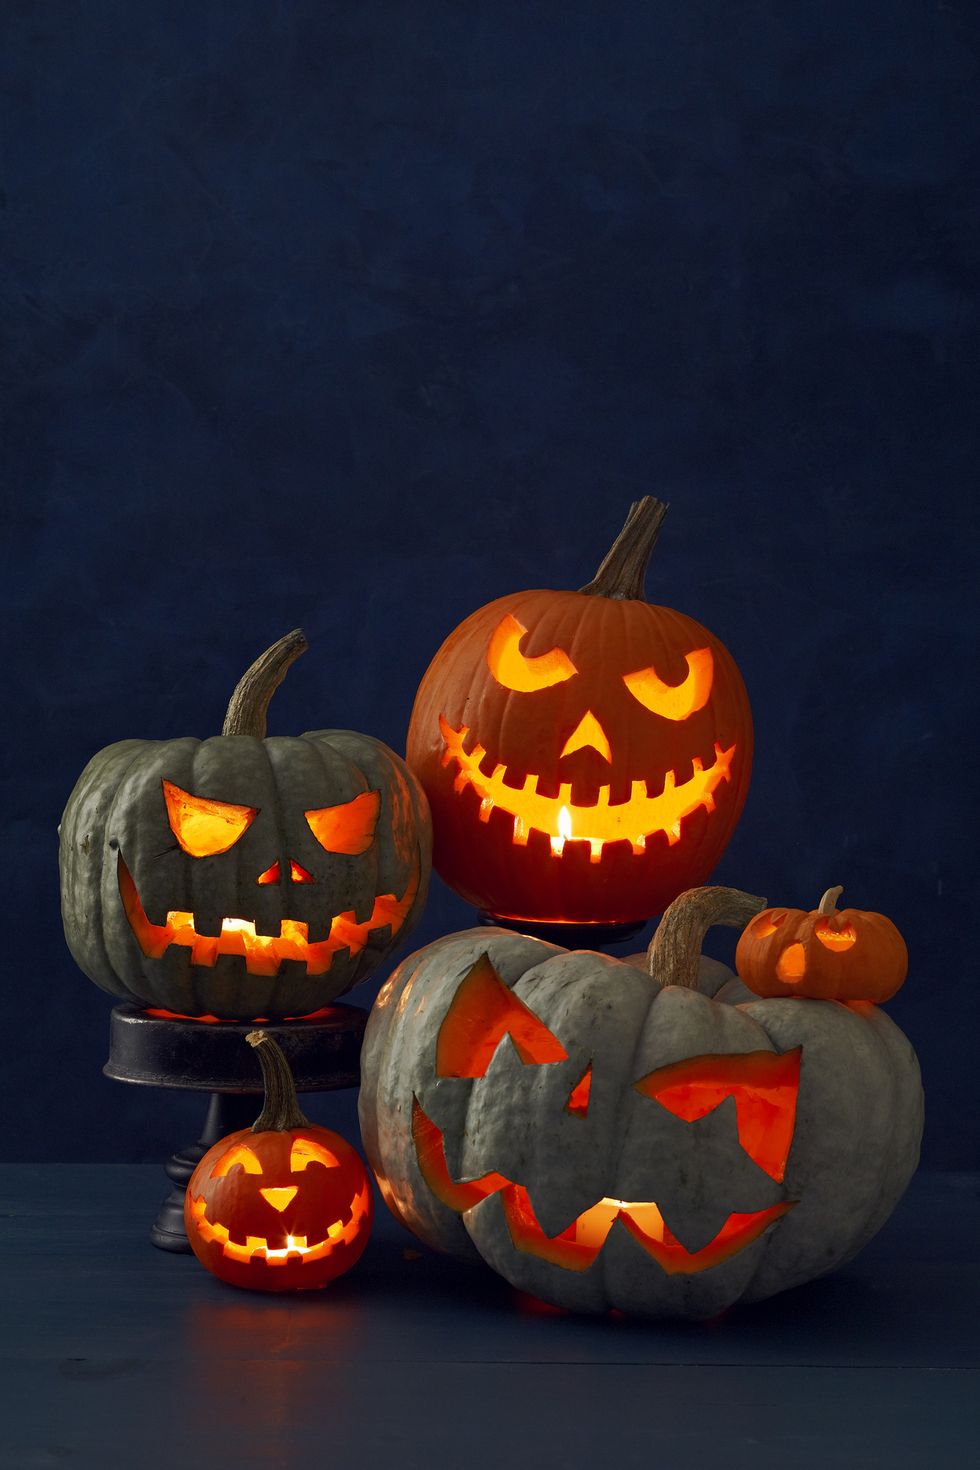 10 Cool Pumpkin Carving Ideas for Halloween 2017 - Easy Ways to Carve a ...